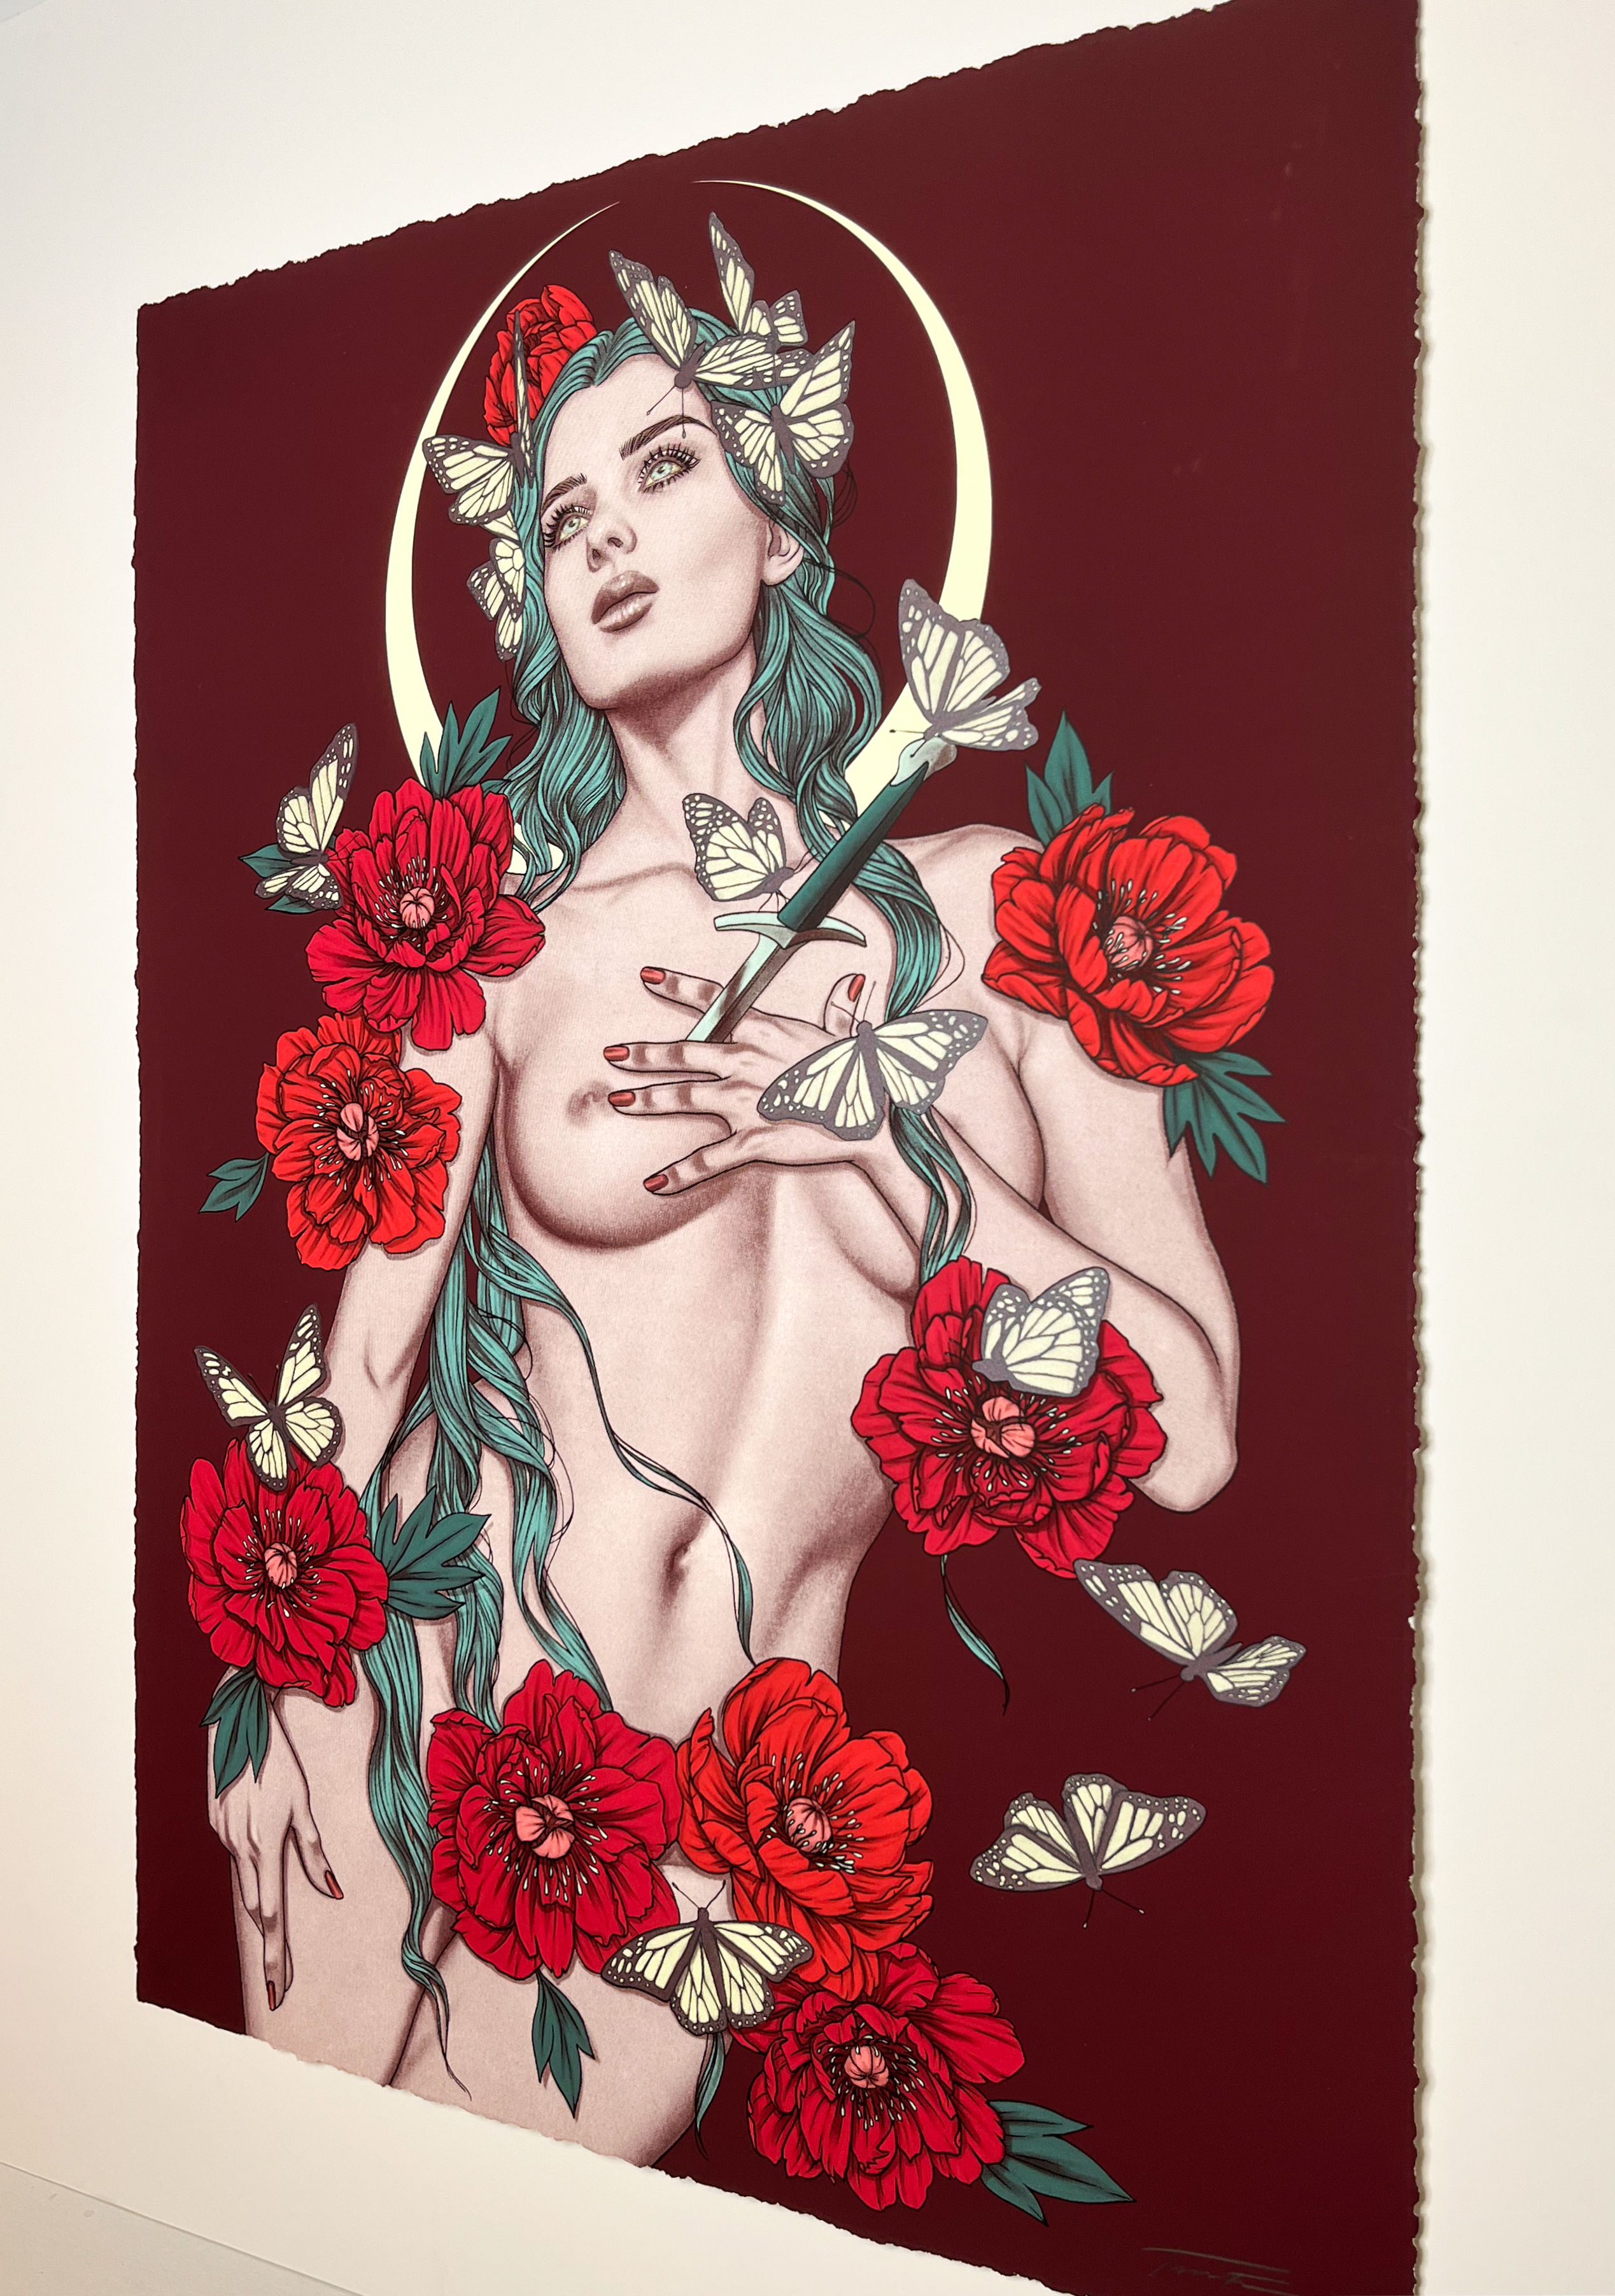 "Pinned Like Butterflies (Beneath The Glass)" 1 of 1 Red Variant by Jenny Frison